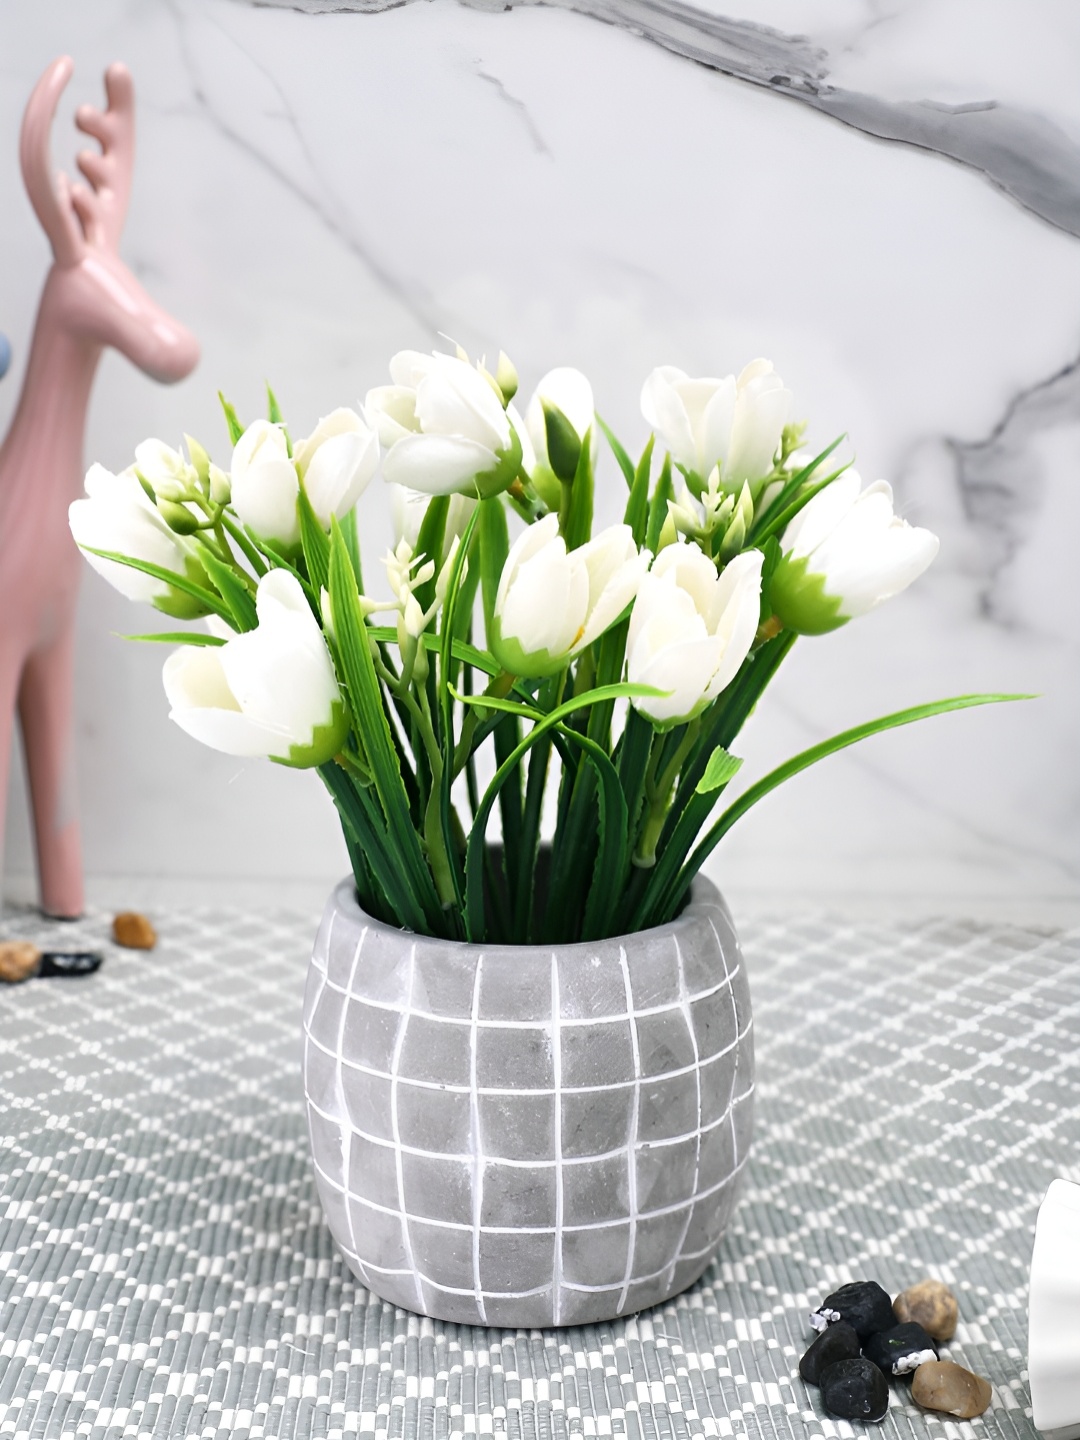 

TAYHAA White & Green Tulip Artificial Flower With Pot